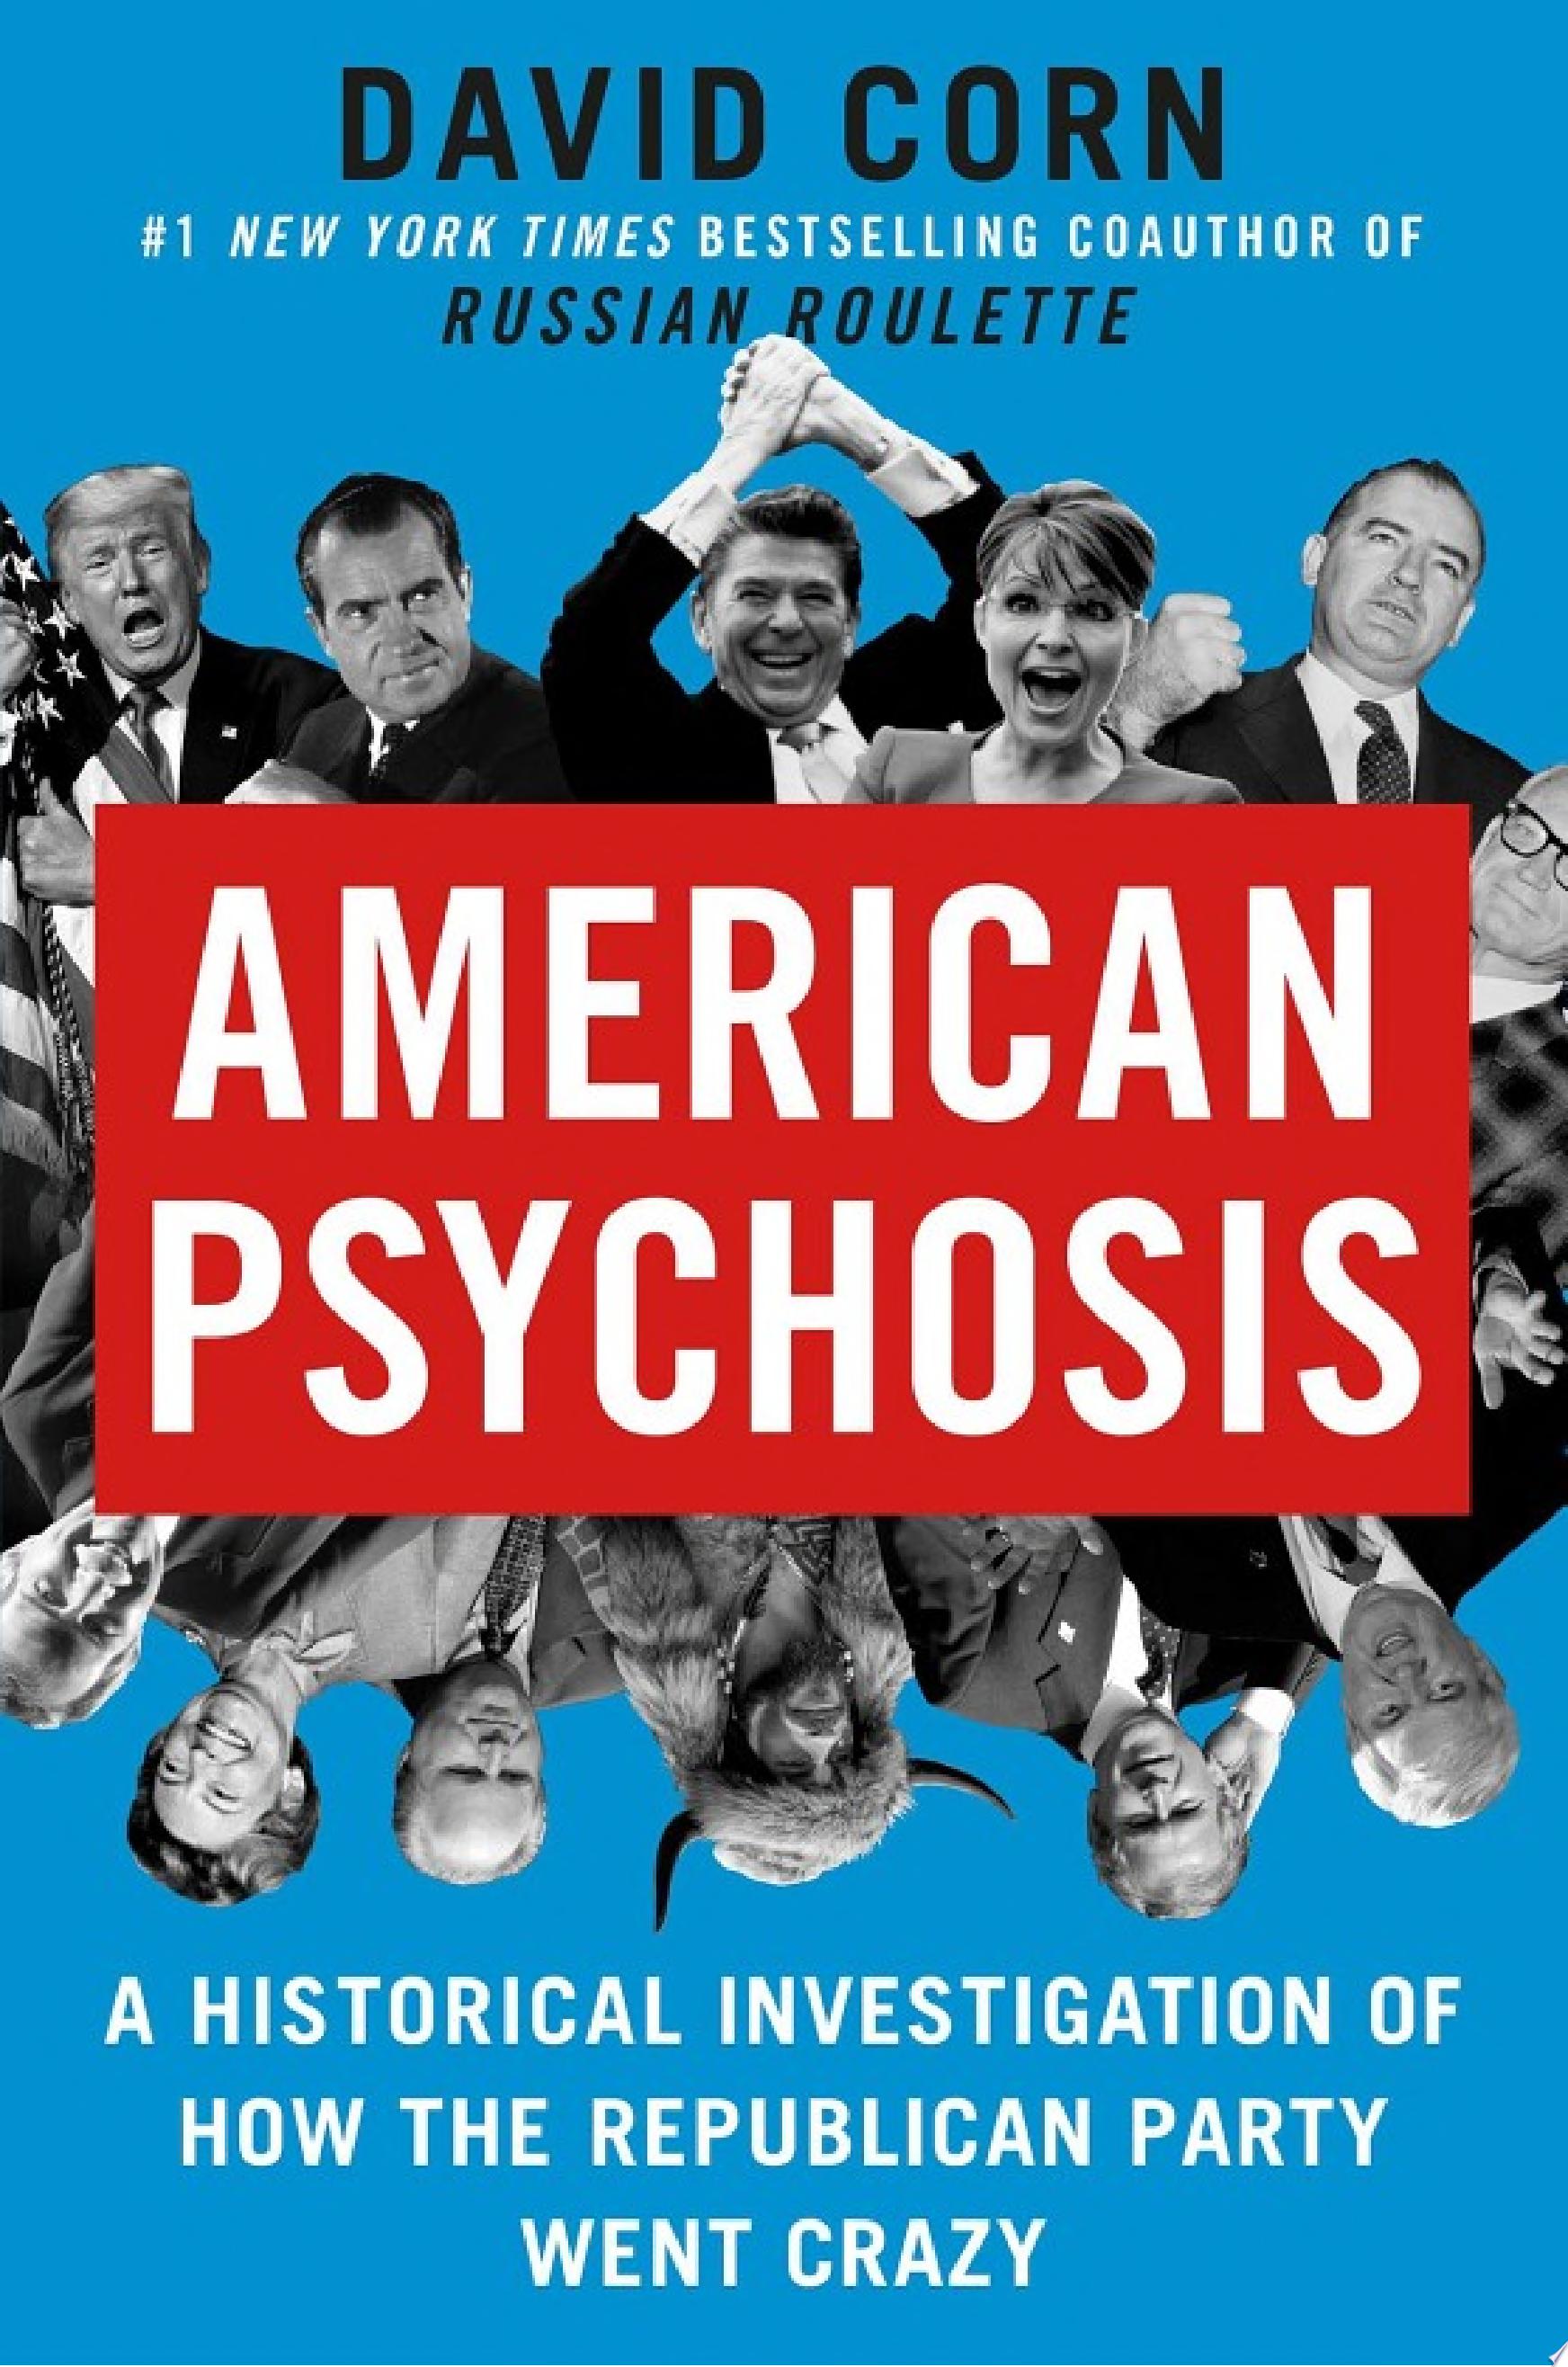 Image for "American Psychosis"